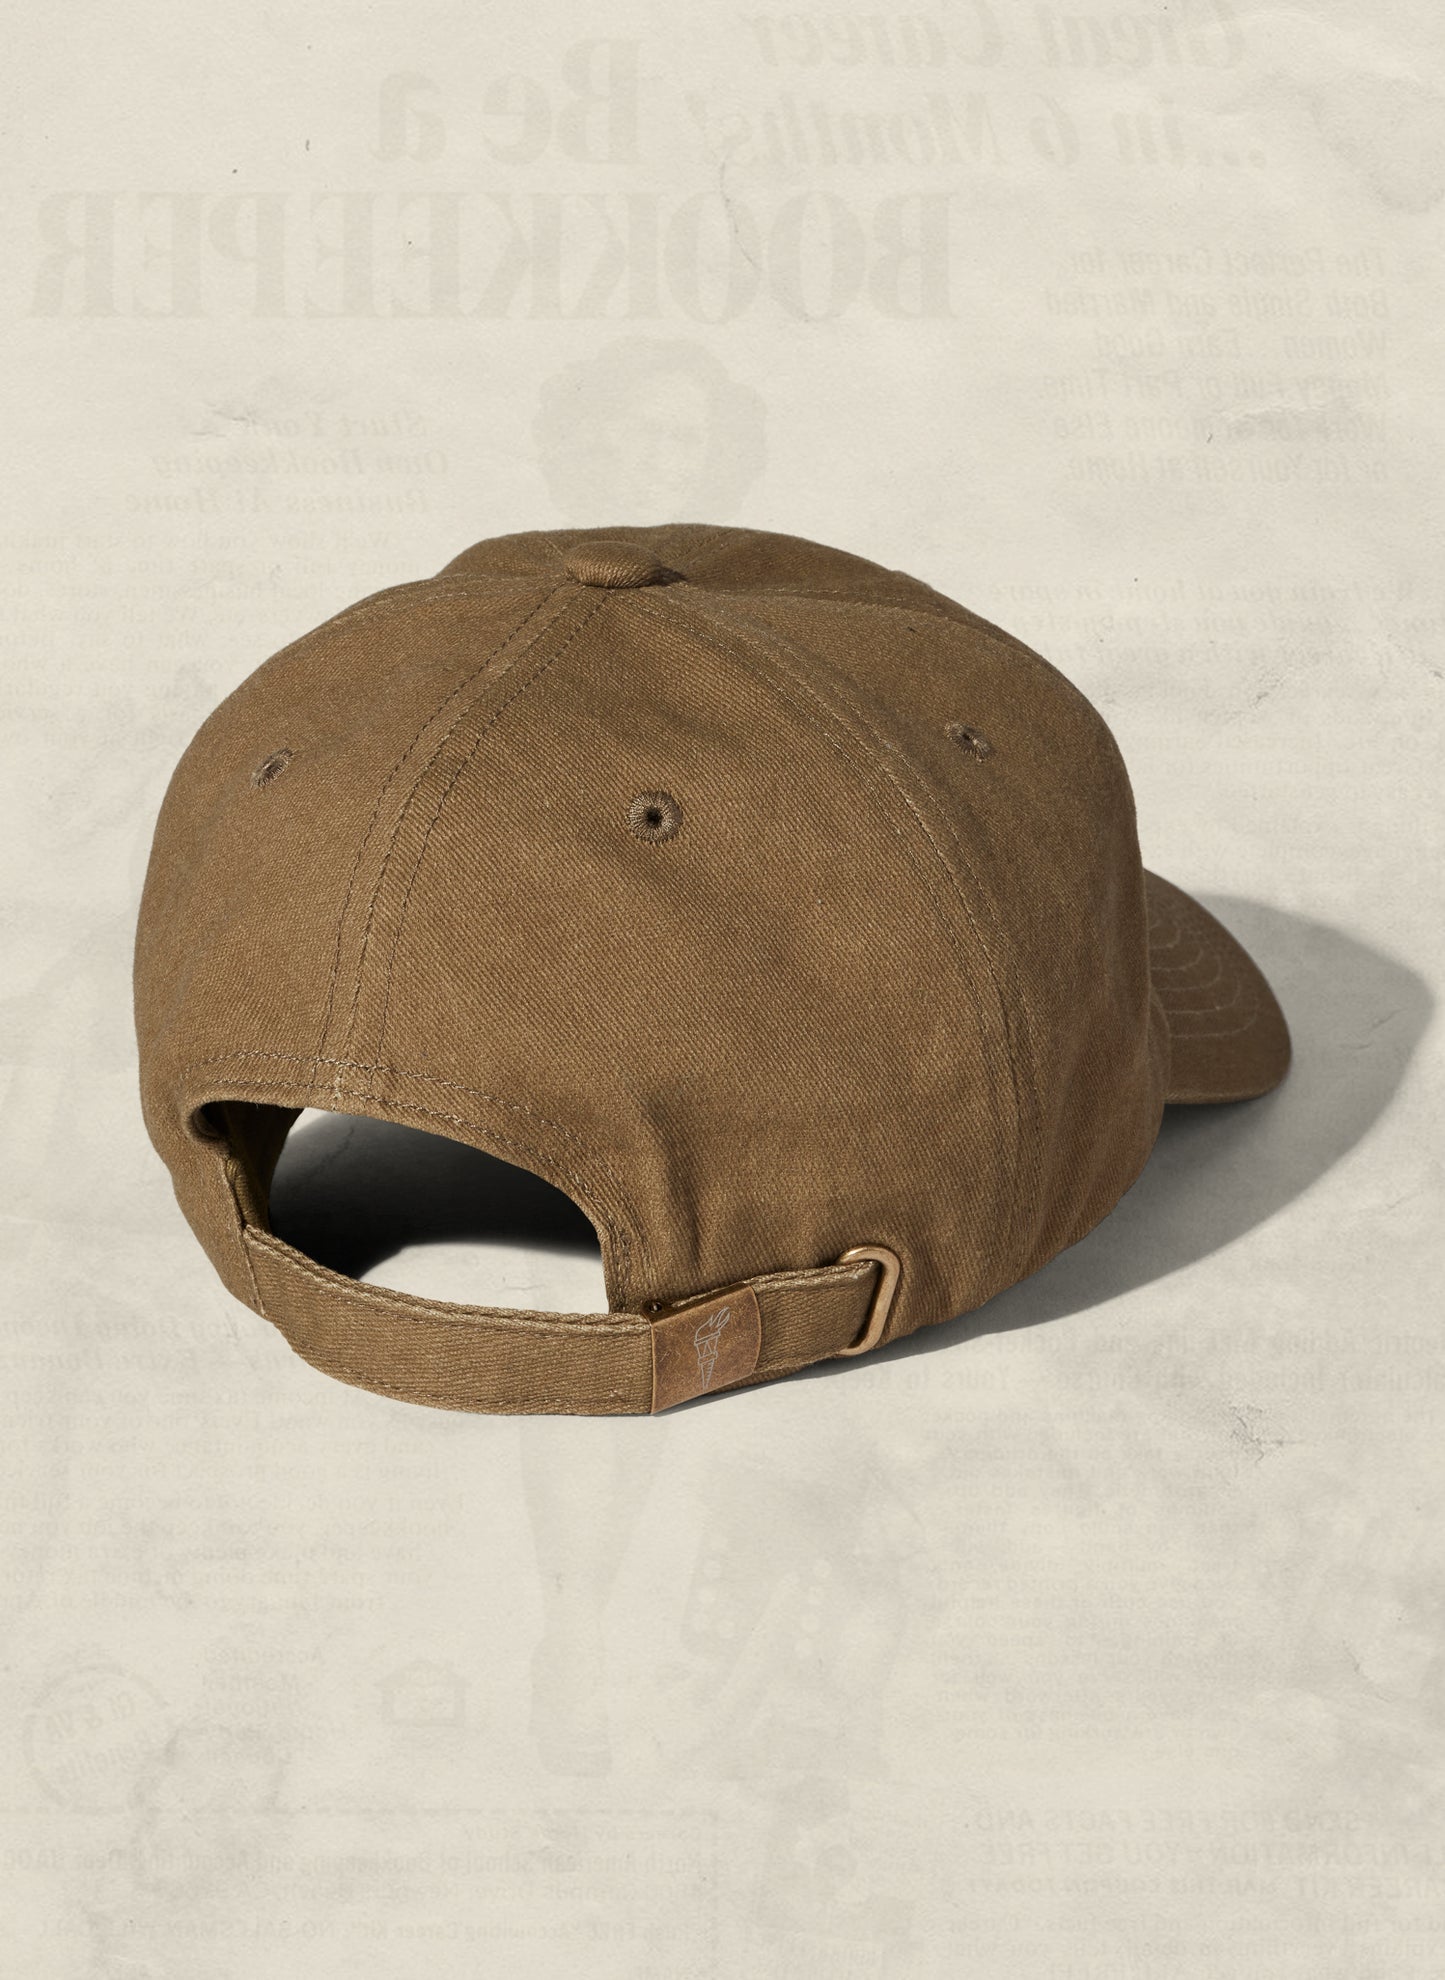 Weld Mfg Vintage Washed Brushed Cotton Unstructured Dad Hat. Comfy Laid Back Hats. Blank Hats for Creative Brands and Companies.